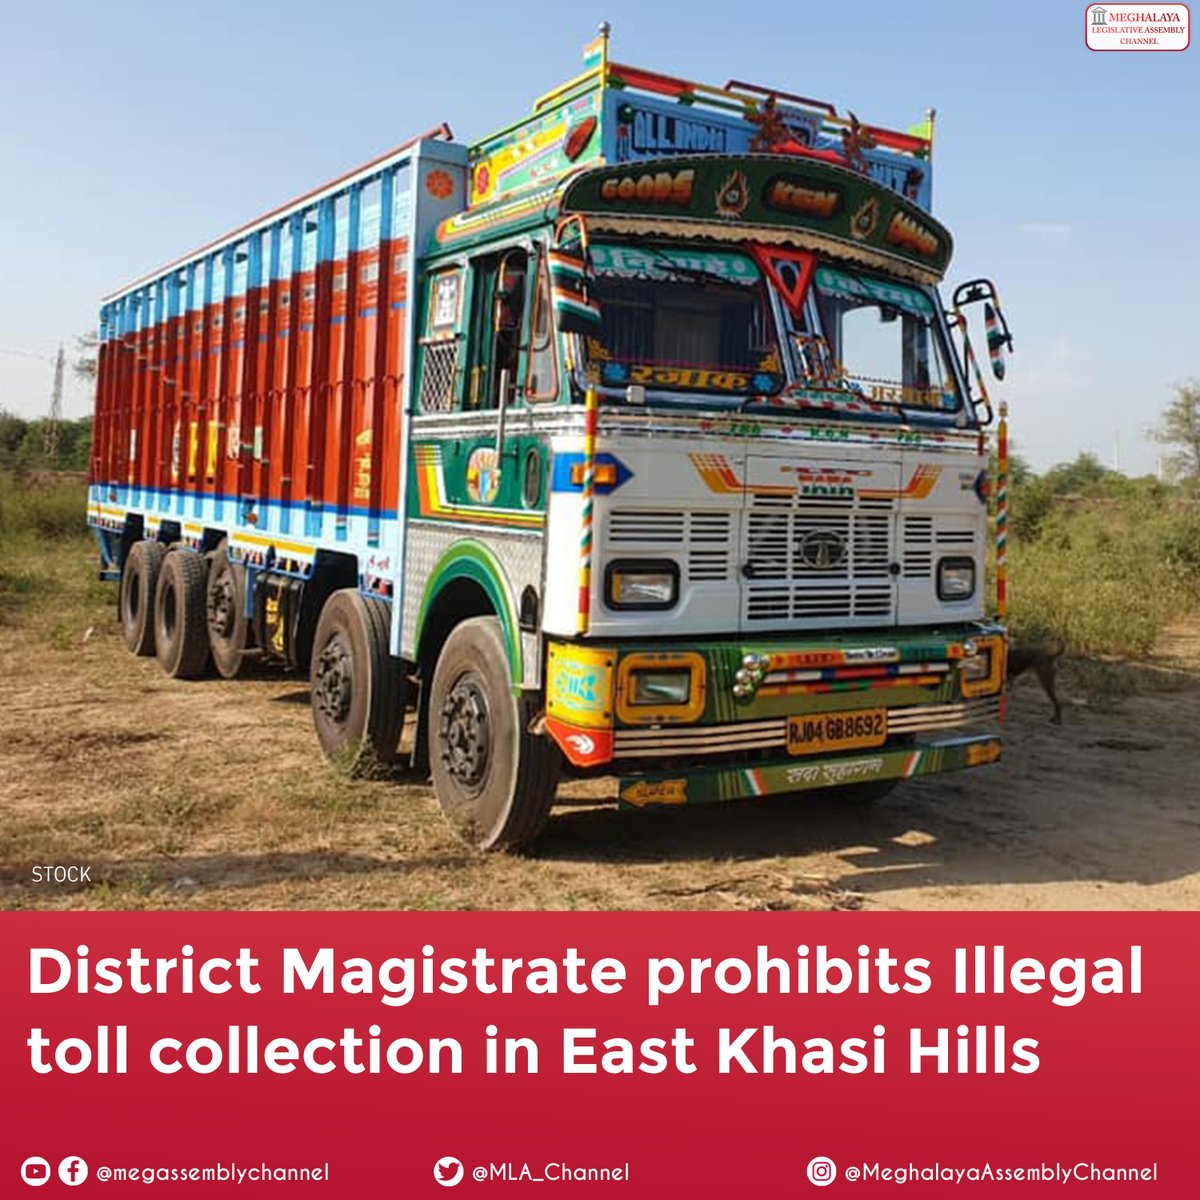 The District Magistrate of East Khasi Hills, S.C. Sadhu, IAS, has issued an urgent order prohibiting unauthorized toll collection in the district. This directive comes in response to reports of alleged illegal toll collection by the Syiem of Sohra, who has been charging Rs. 400